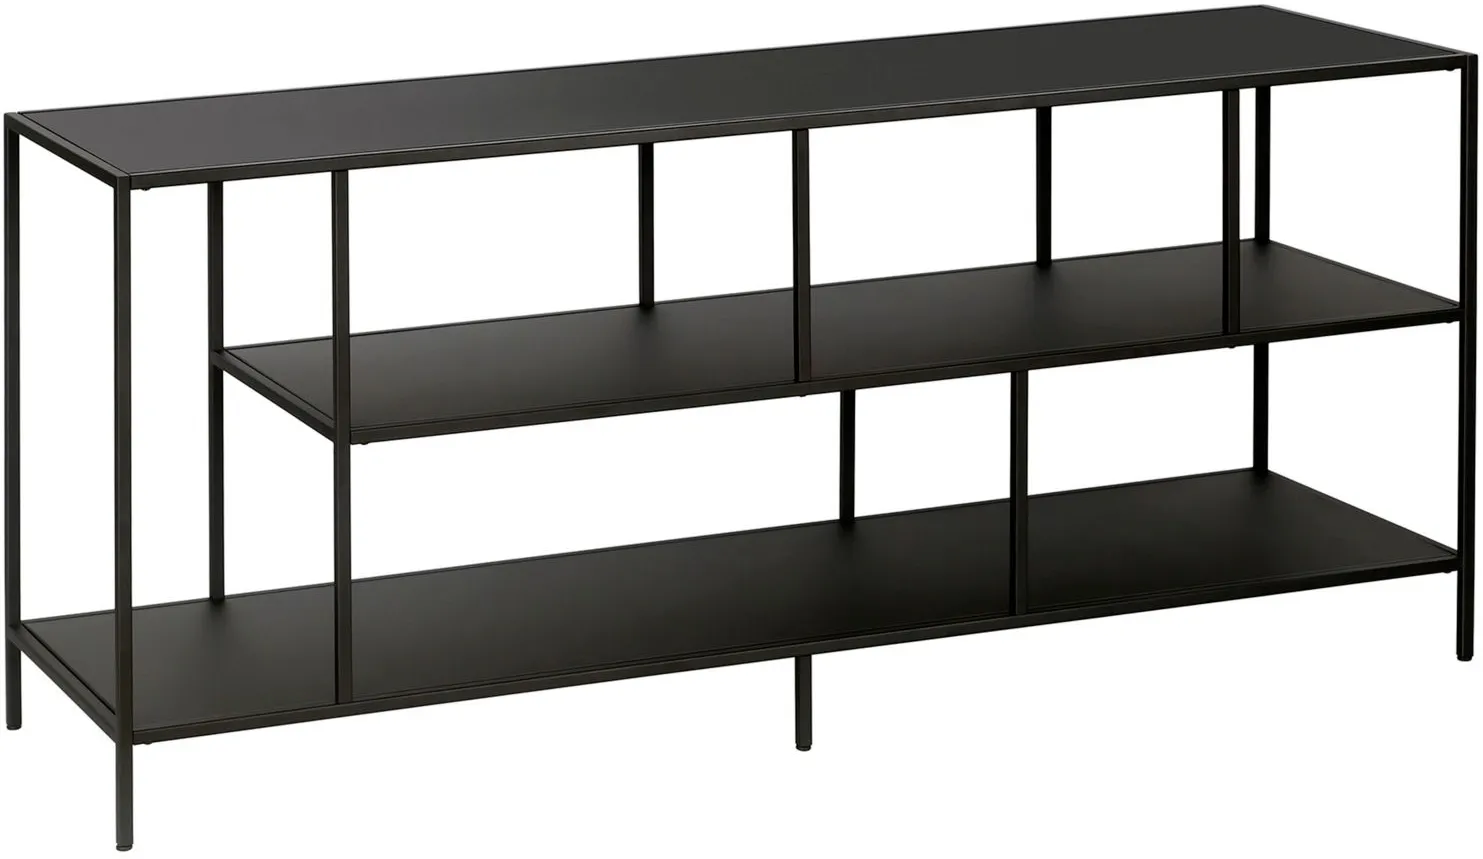 Hudson & Canal Winthrop 55" TV Stand with Metal Shelves in Blackened Bronze by Hudson & Canal